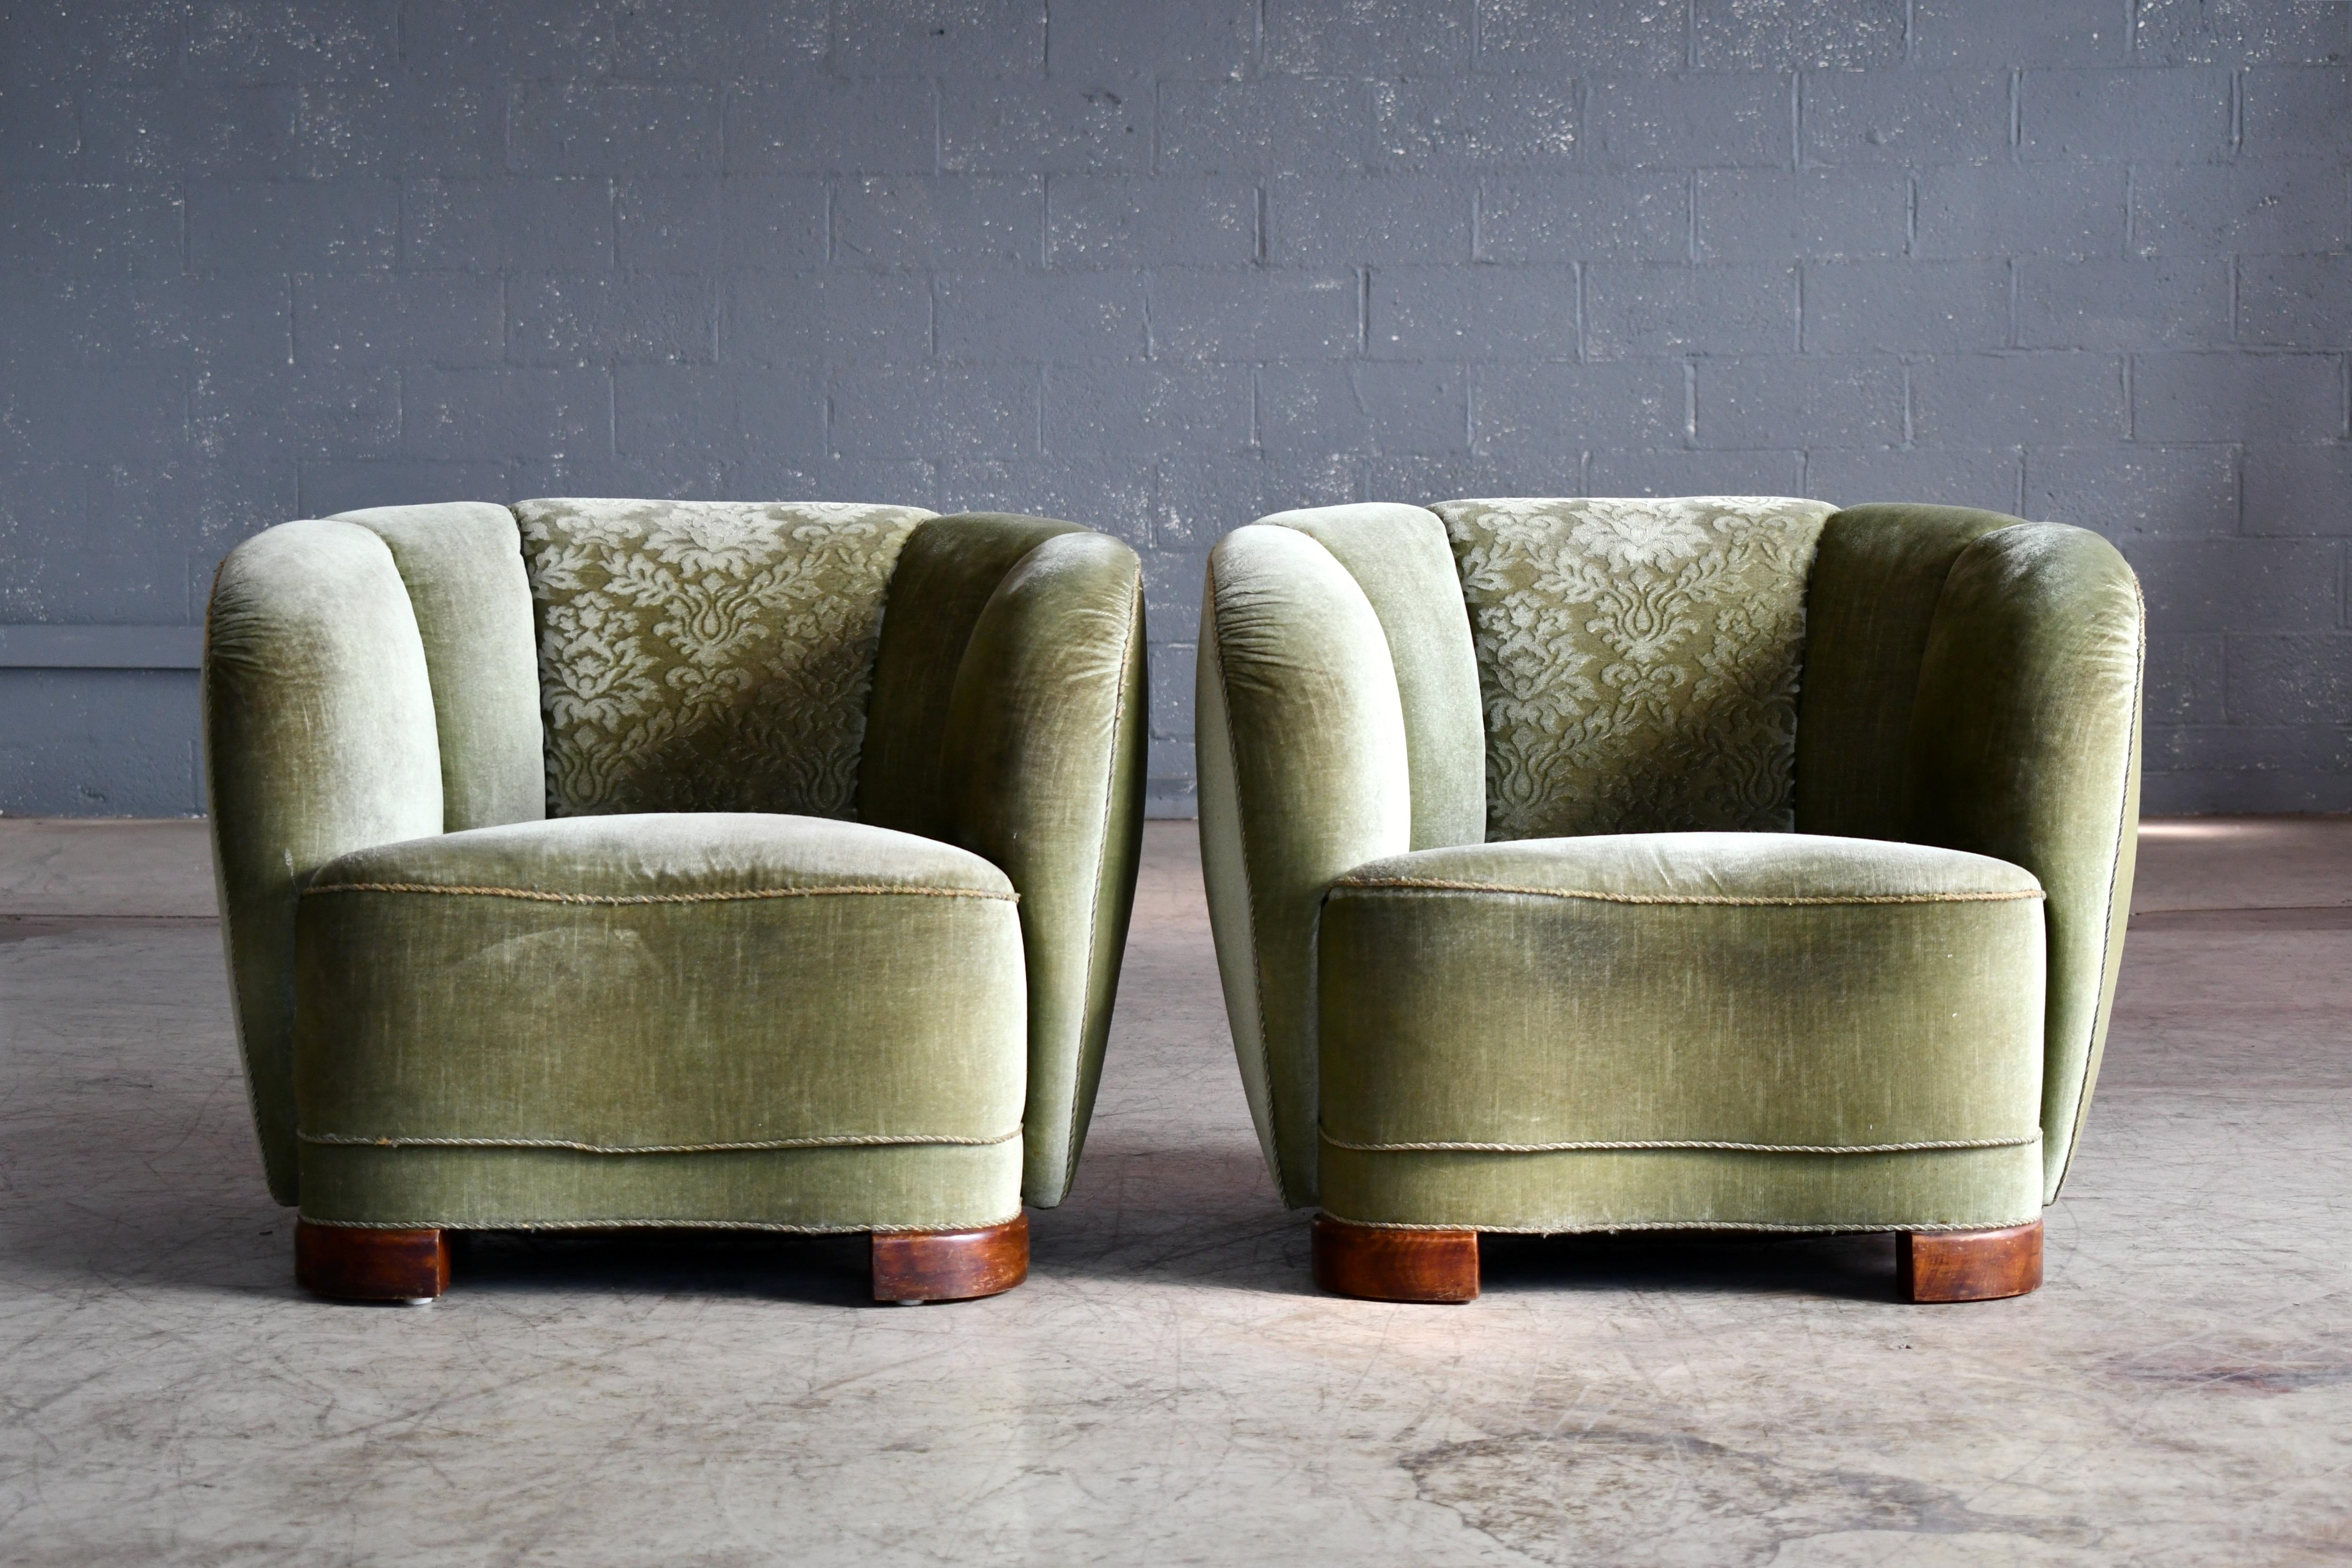 Incredibly comfortable, exuberant, and superbly made pair of Danish lounge chairs perfectly capturing the essence of 1940s Danish design coming out of the Art Deco era and into the midcentury. The curved backrests and low slung proportions and block